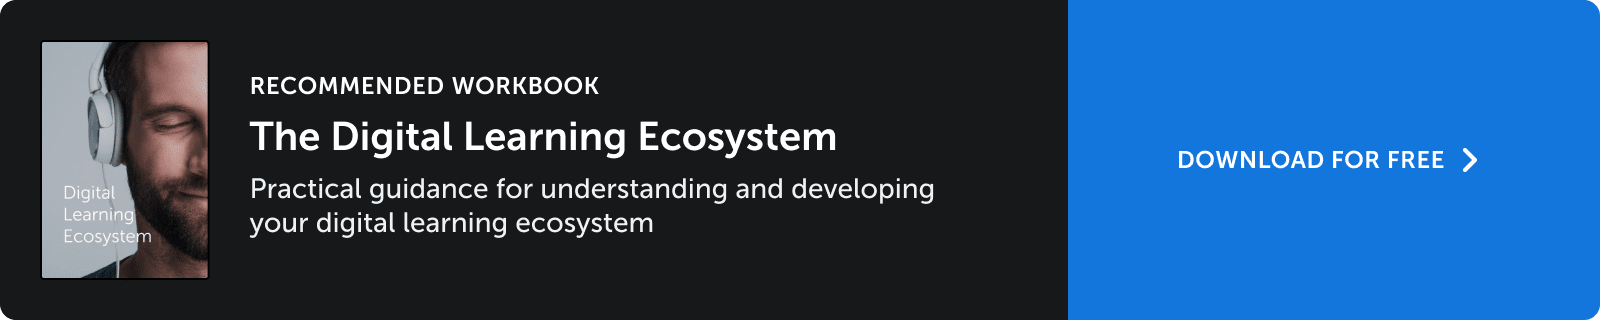 The banner for Digital Learning Ecosystem